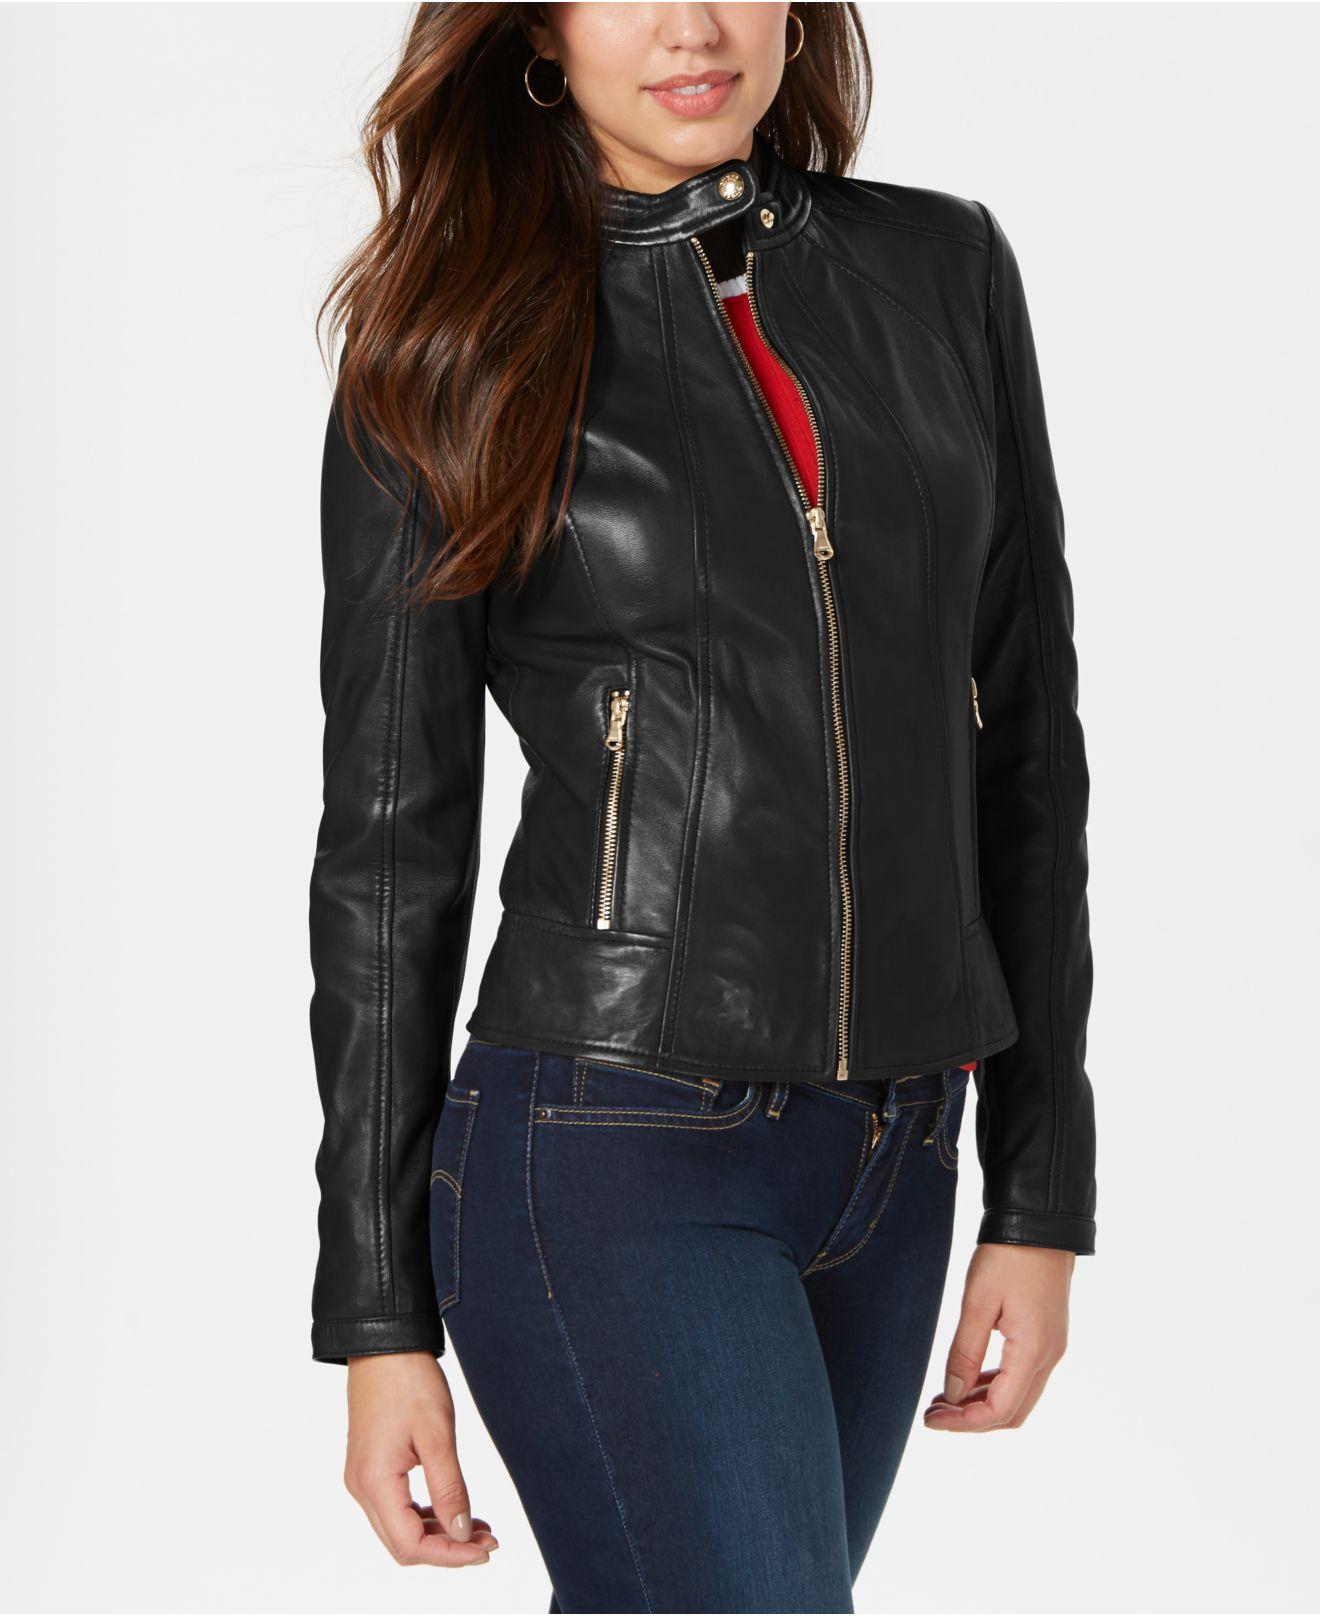 Guess Leather Jacket With Snap Collar in Black - Lyst